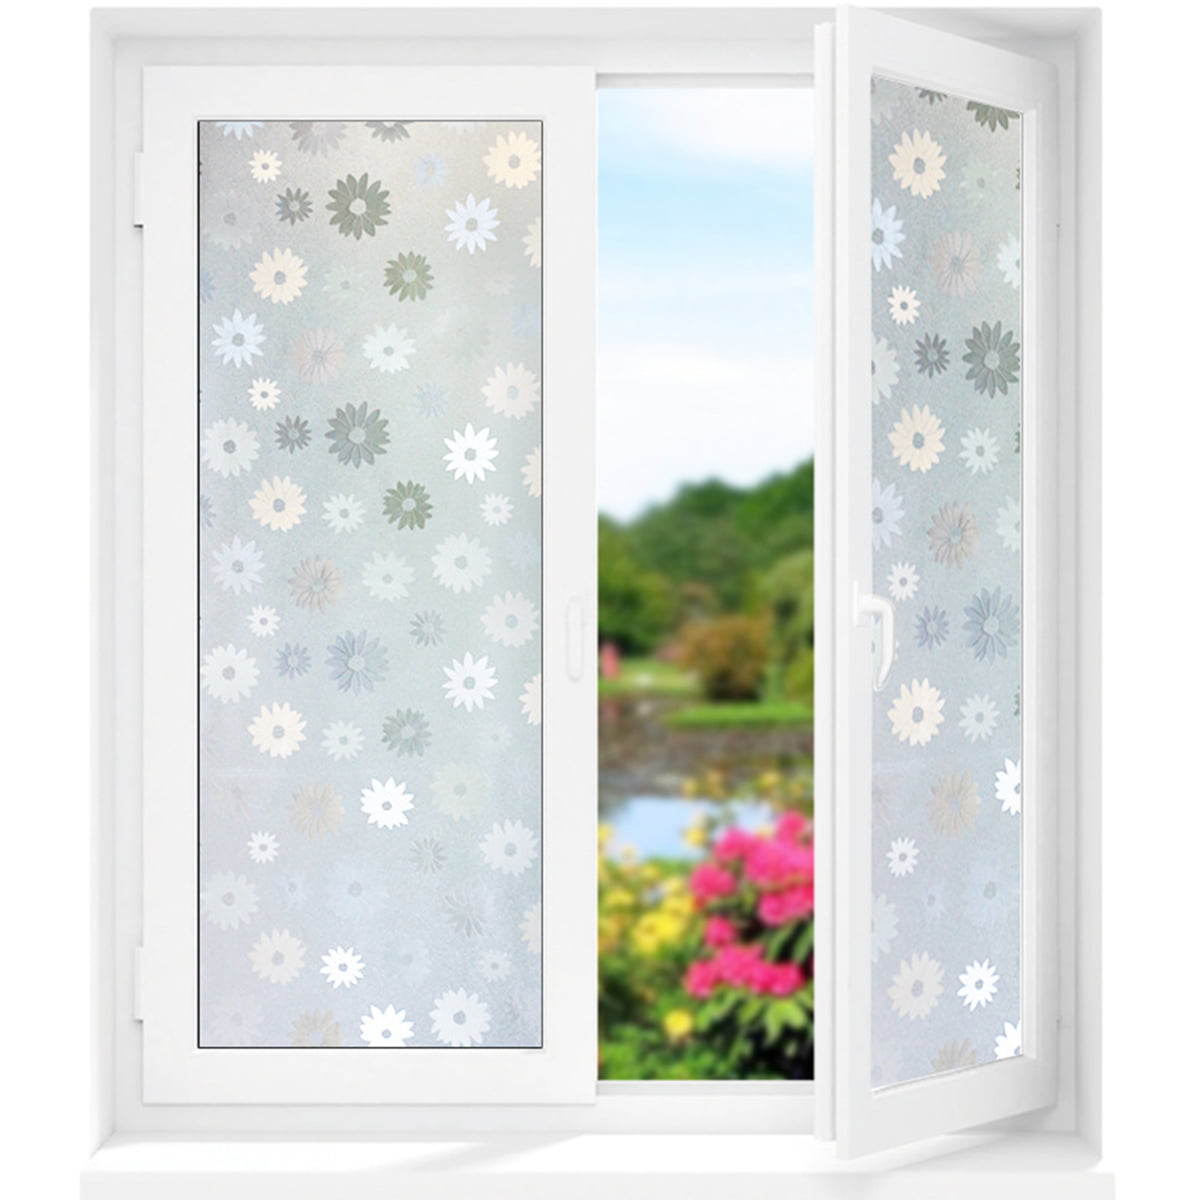 39'' Frosted Film Glass Home Bathroom Window Security Privacy Protection Sticker 